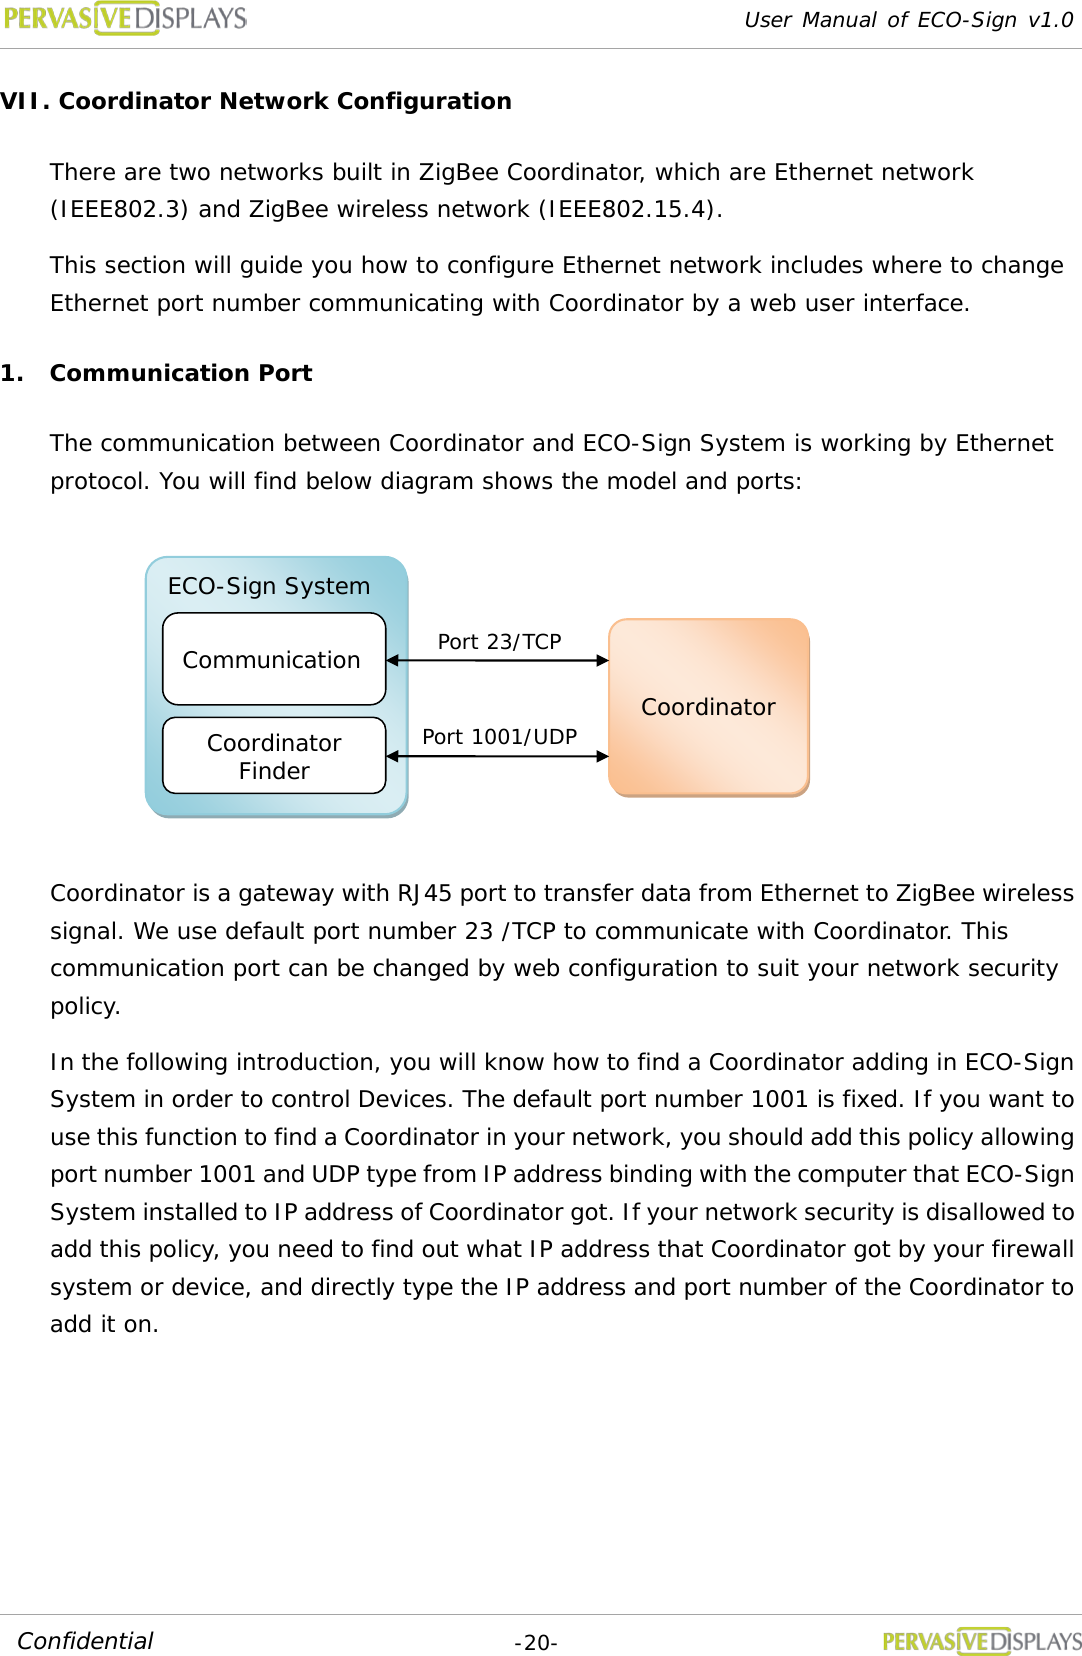 User Manual of ECO-Sign v1.0  -20- Confidential VII. Coordinator Network Configuration There are two networks built in ZigBee Coordinator, which are Ethernet network (IEEE802.3) and ZigBee wireless network (IEEE802.15.4). This section will guide you how to configure Ethernet network includes where to change Ethernet port number communicating with Coordinator by a web user interface. 1. Communication Port The communication between Coordinator and ECO-Sign System is working by Ethernet protocol. You will find below diagram shows the model and ports:  Coordinator is a gateway with RJ45 port to transfer data from Ethernet to ZigBee wireless signal. We use default port number 23 /TCP to communicate with Coordinator. This communication port can be changed by web configuration to suit your network security policy. In the following introduction, you will know how to find a Coordinator adding in ECO-Sign System in order to control Devices. The default port number 1001 is fixed. If you want to use this function to find a Coordinator in your network, you should add this policy allowing port number 1001 and UDP type from IP address binding with the computer that ECO-Sign System installed to IP address of Coordinator got. If your network security is disallowed to add this policy, you need to find out what IP address that Coordinator got by your firewall system or device, and directly type the IP address and port number of the Coordinator to add it on.   ECO-Sign System Communication Coordinator Finder Coordinator Port 23/TCP Port 1001/UDP 